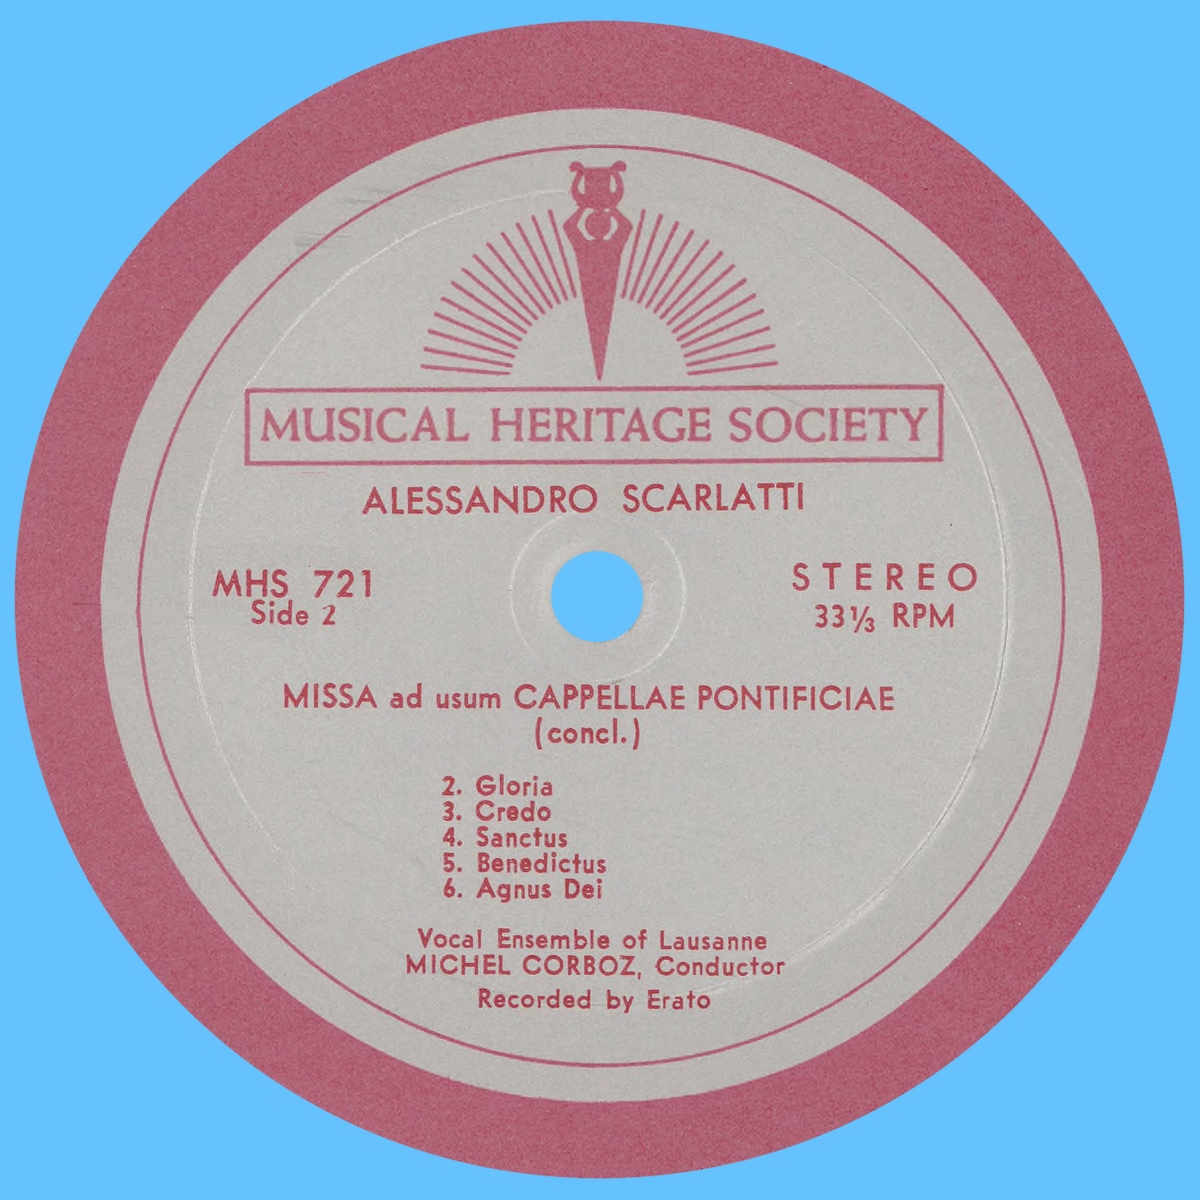 Étiquette verso du disque „The Musical Heritage Society Inc.“ MHS 721